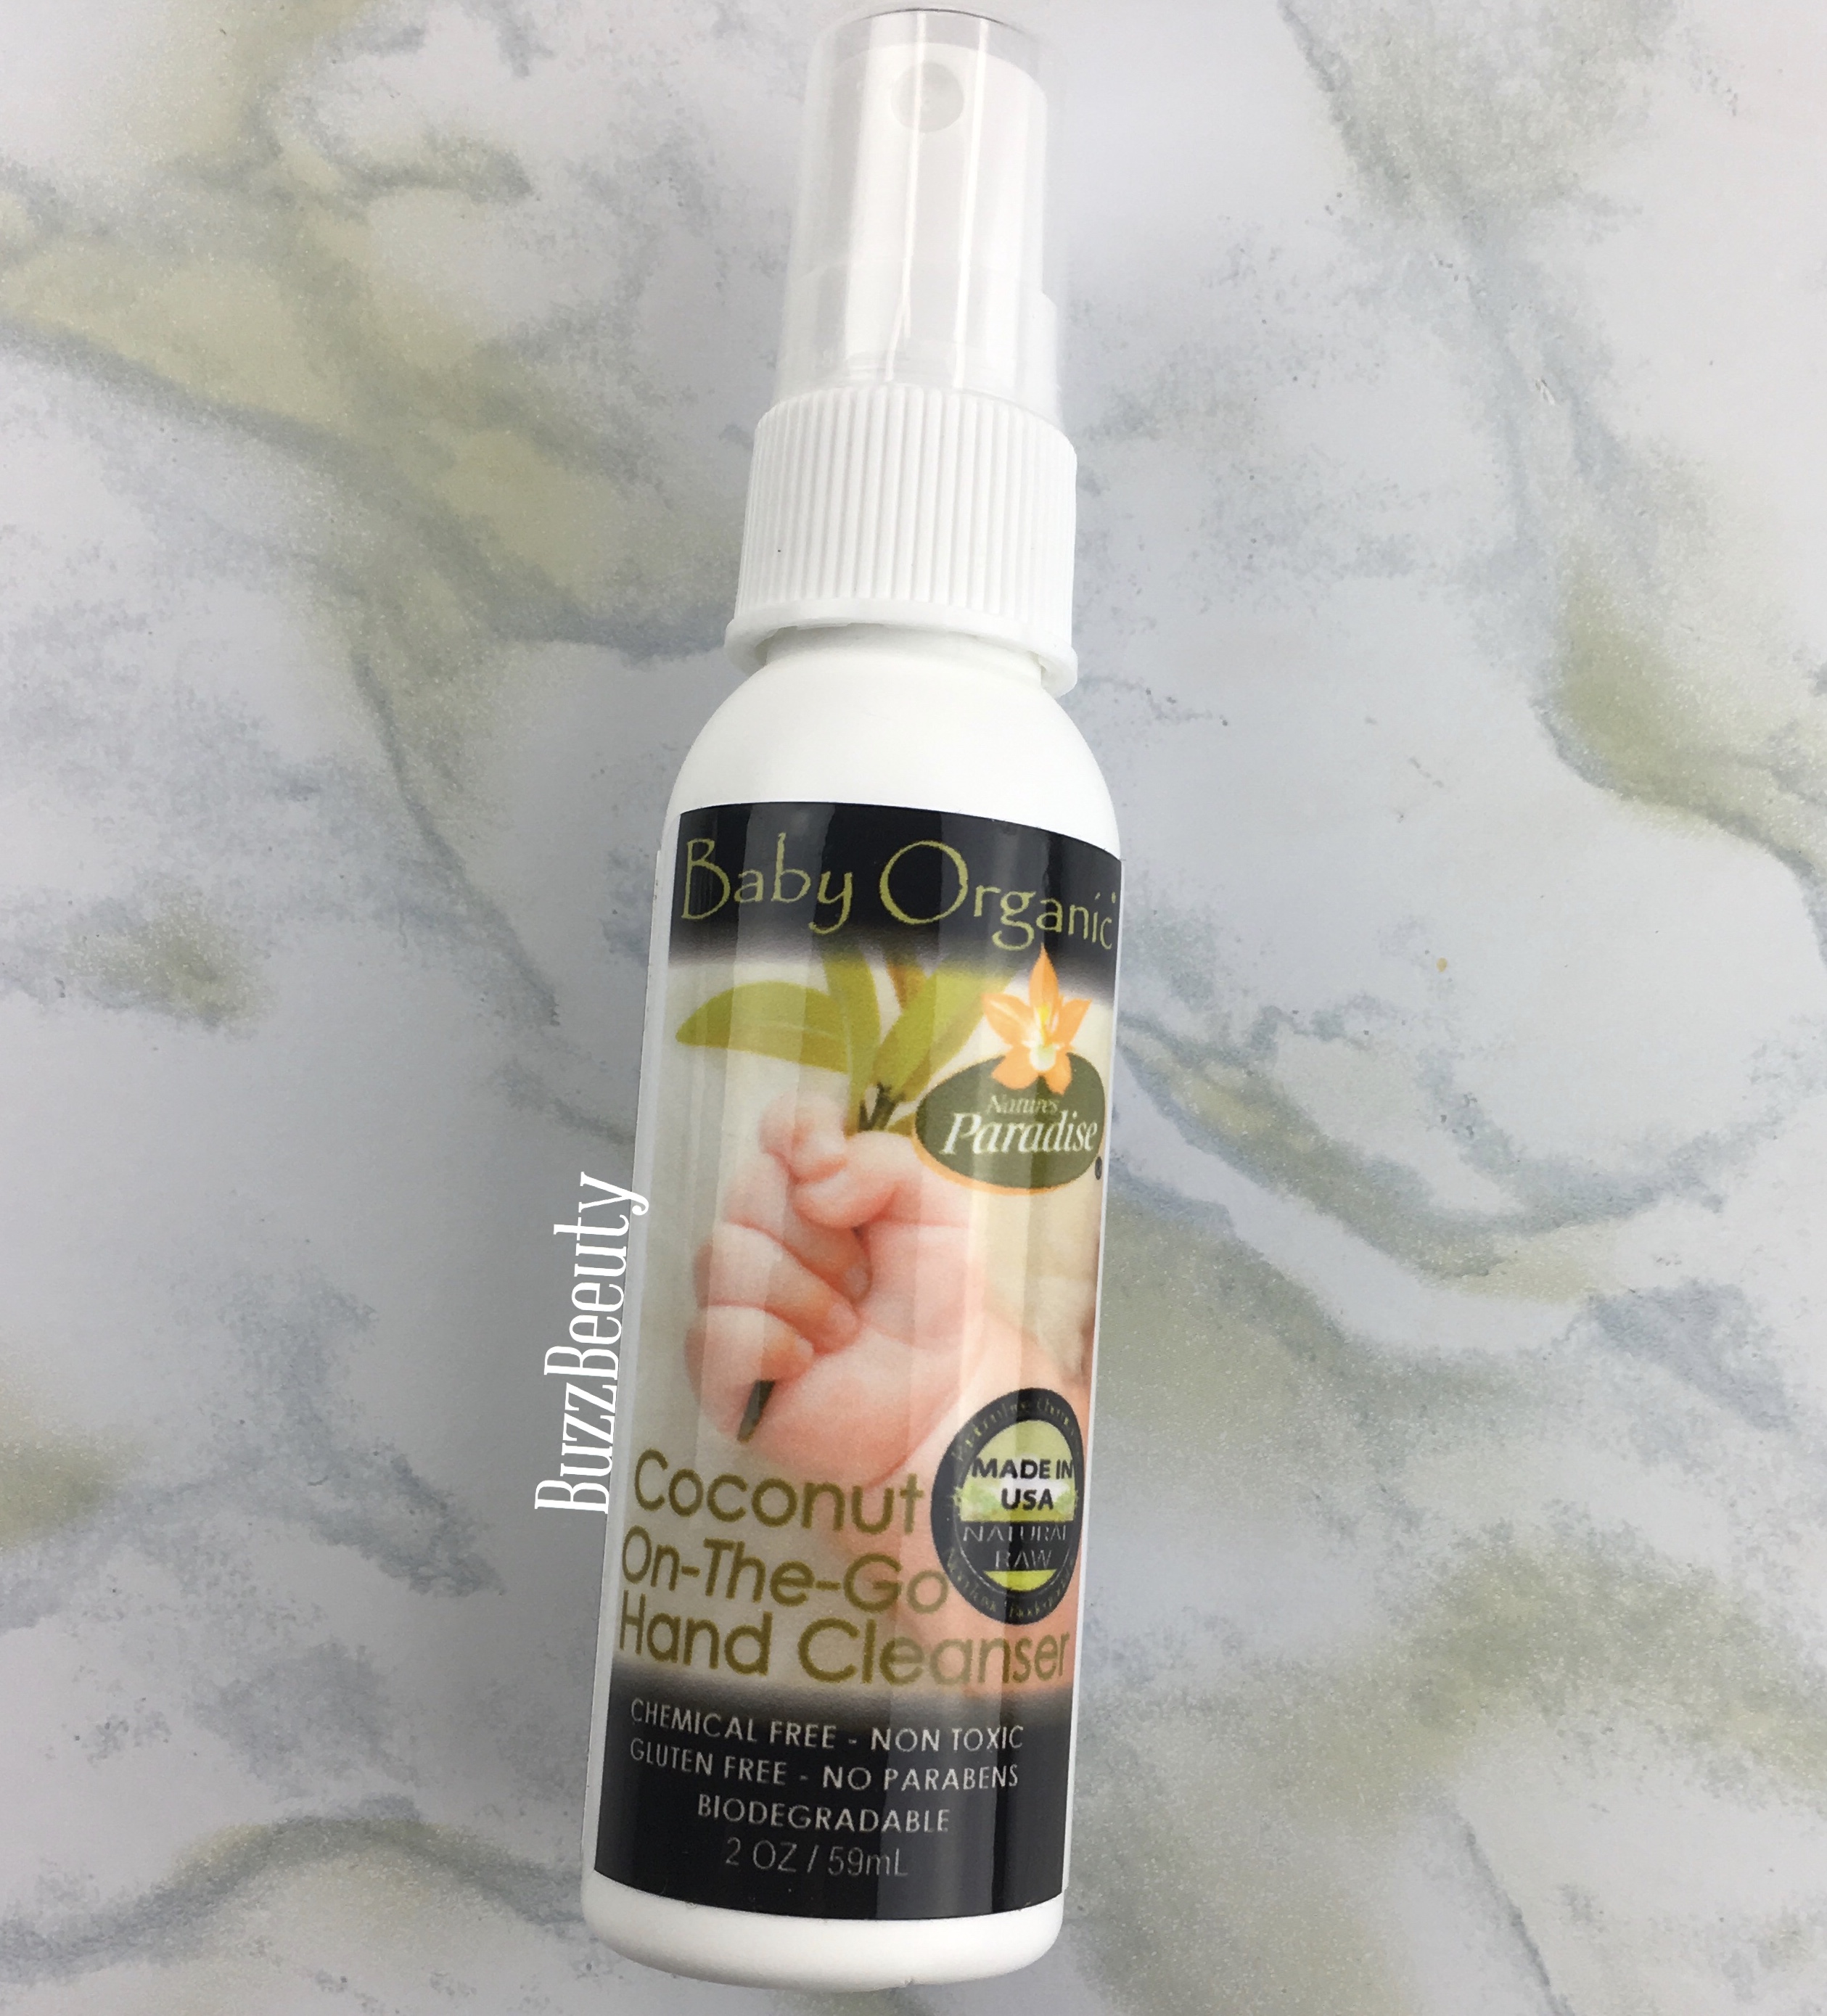 Baby Organics Coconut On-The-Go Hand Cleanser